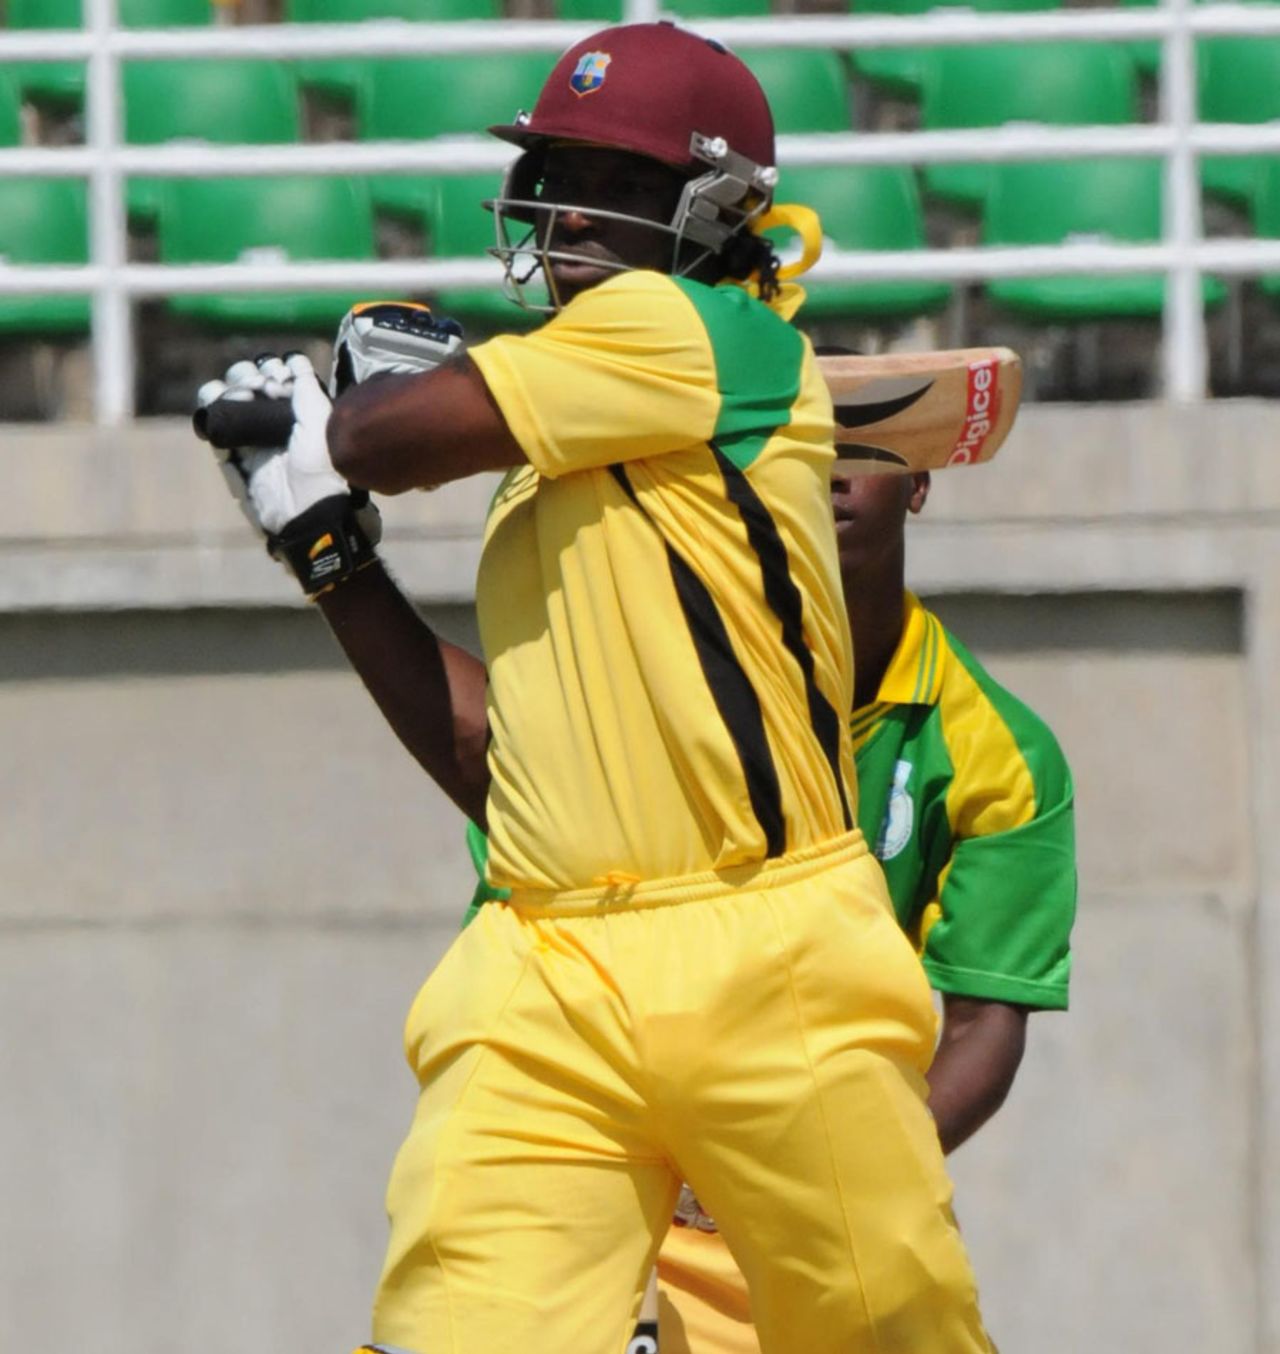 Chris Gayle pulls one during his unbeaten 58, Jamaica v Windward Islands, Group A match, WICB Cup, Trelawny Stadium, October 14, 2010